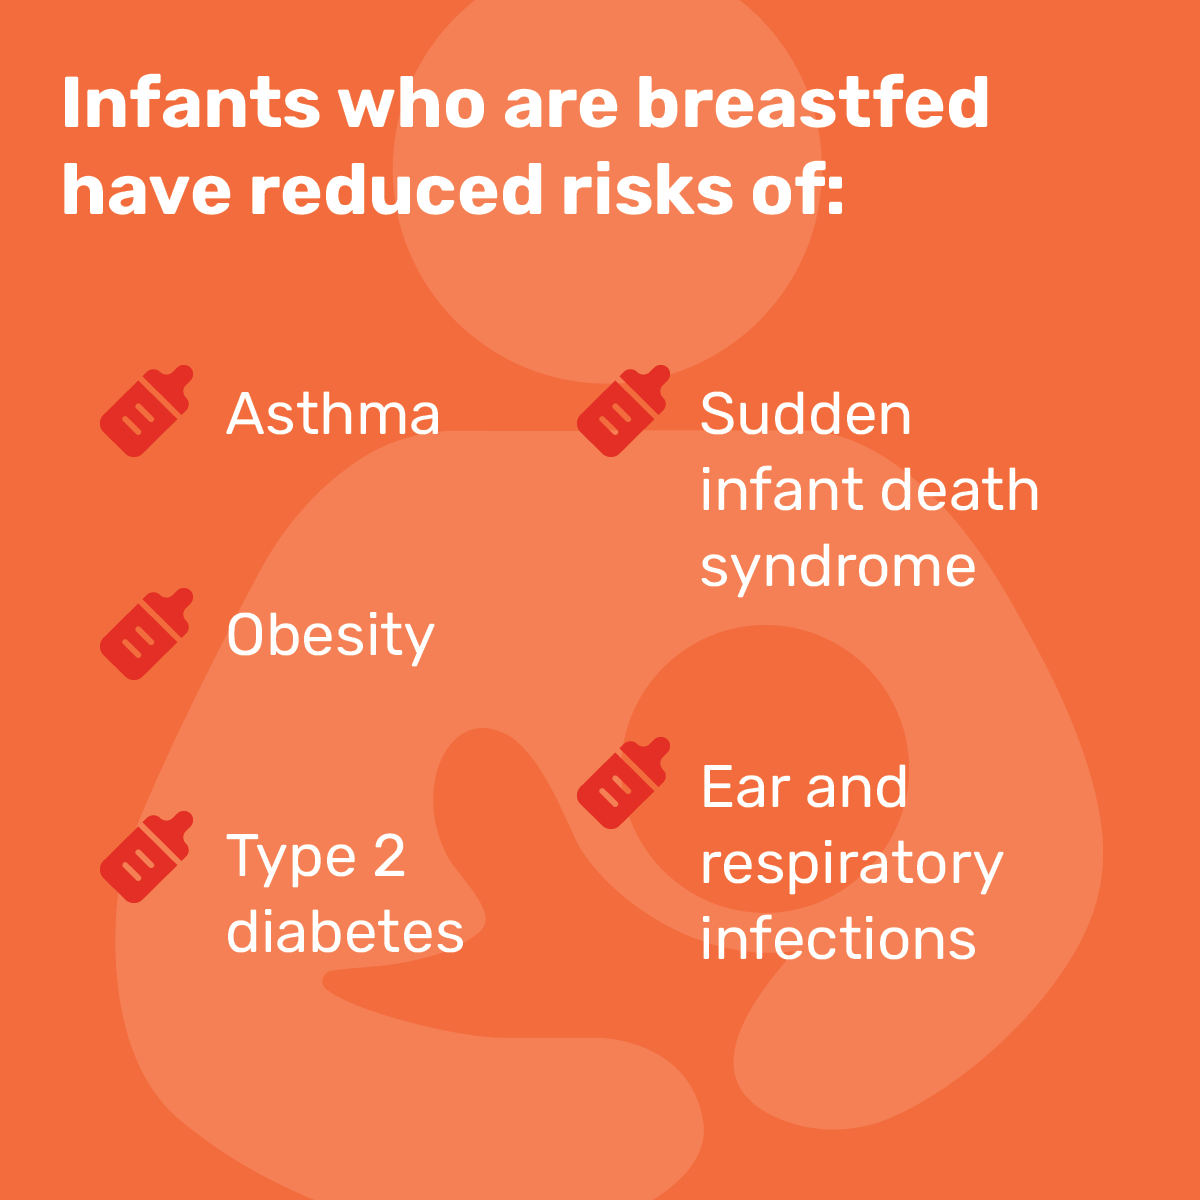 Infants who are breastfed have a reduced risk of: Asthma, Obesity, Type 2 diabetes, Sudden infant death syndrome, Ear and respiratory infections.